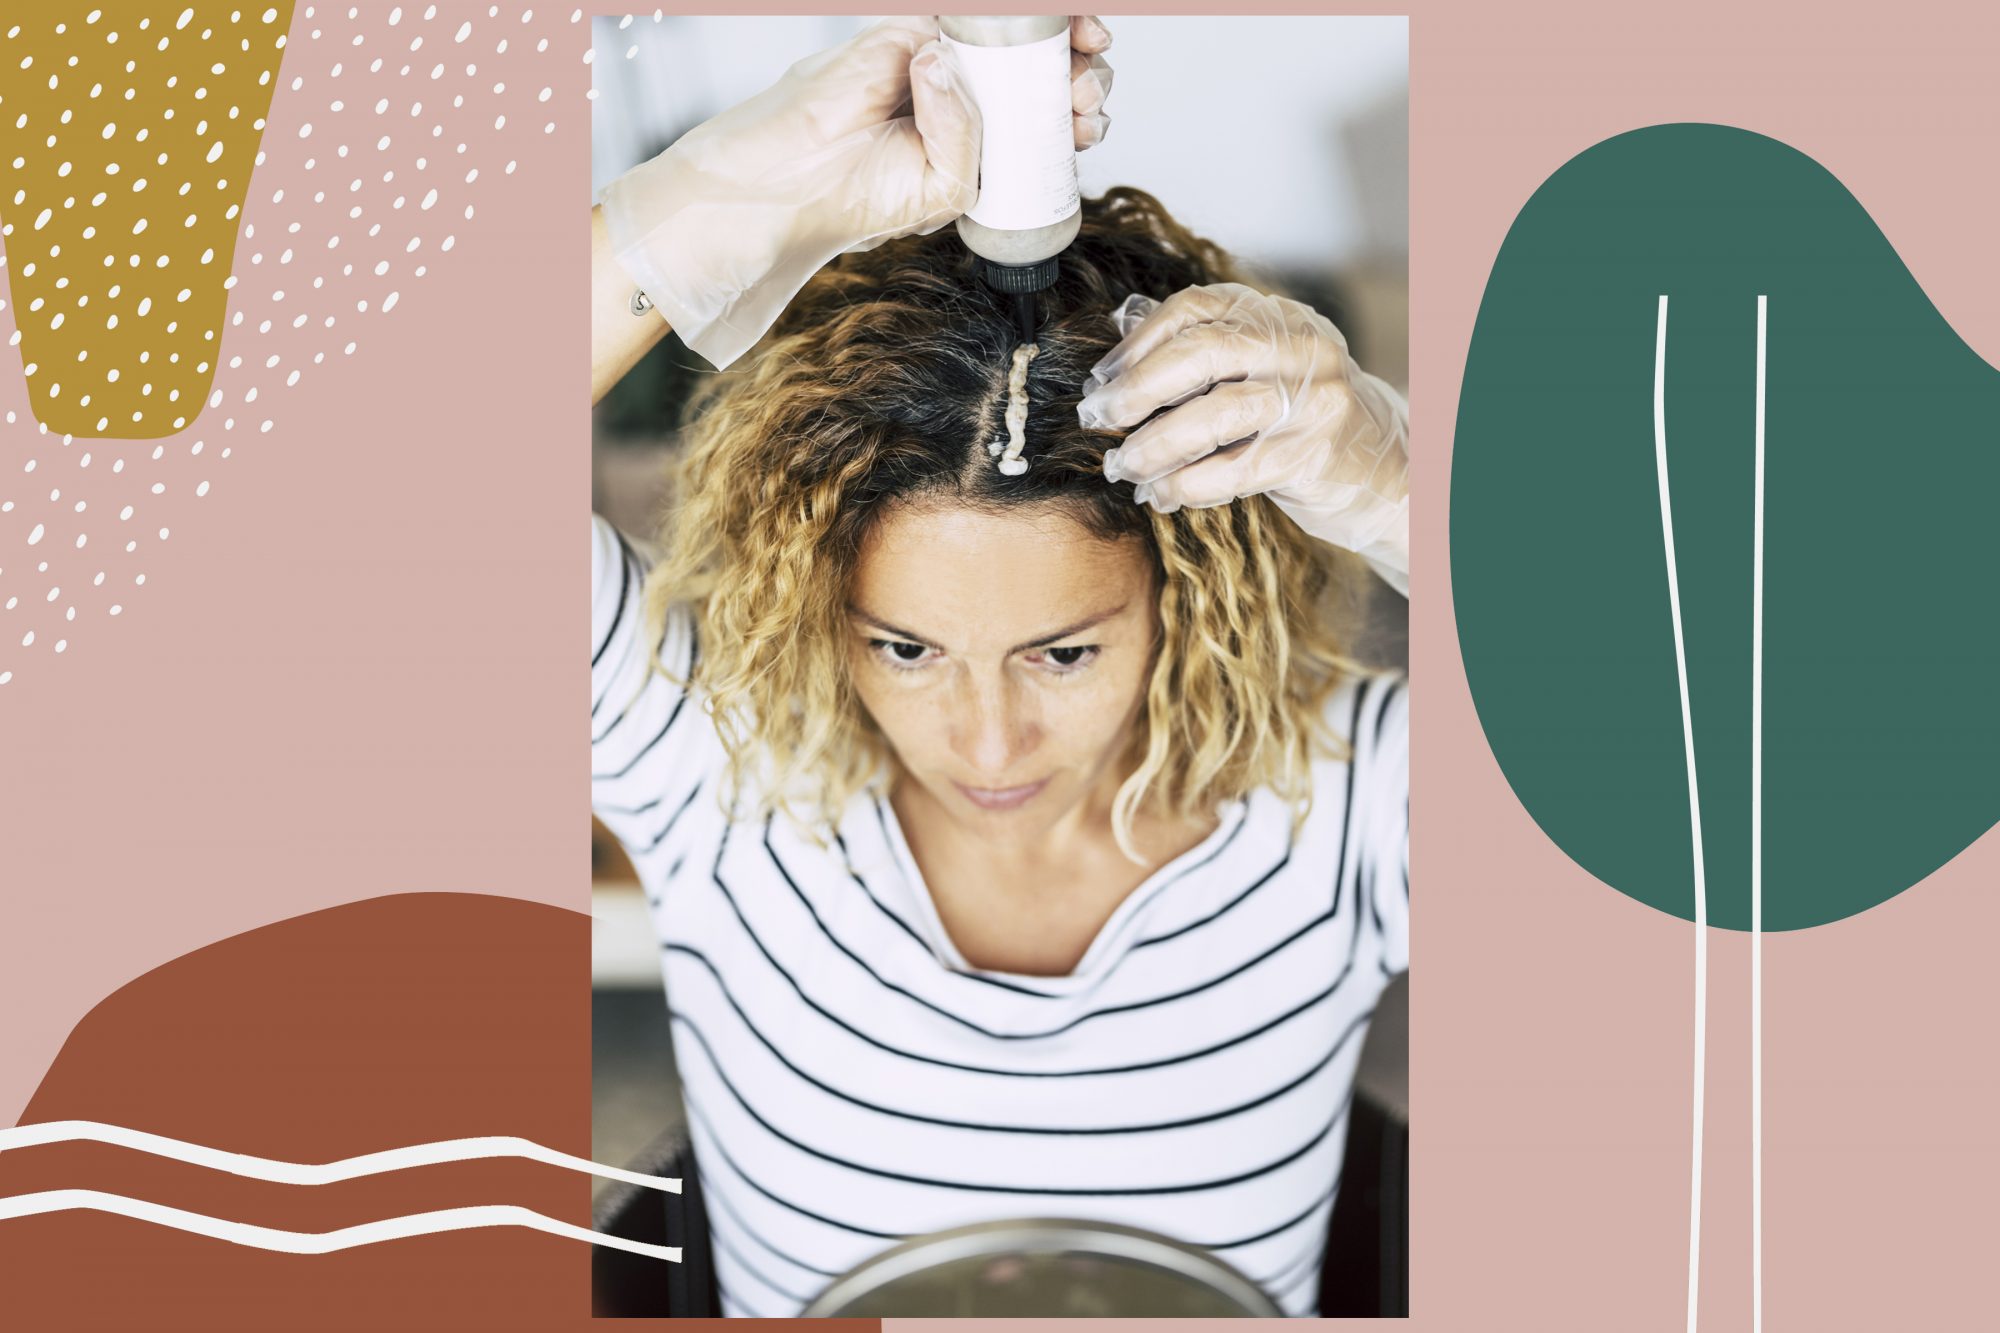 10. "Dirty Blond Copper Hair Maintenance: How Often Should You Touch Up Your Roots?" - wide 6